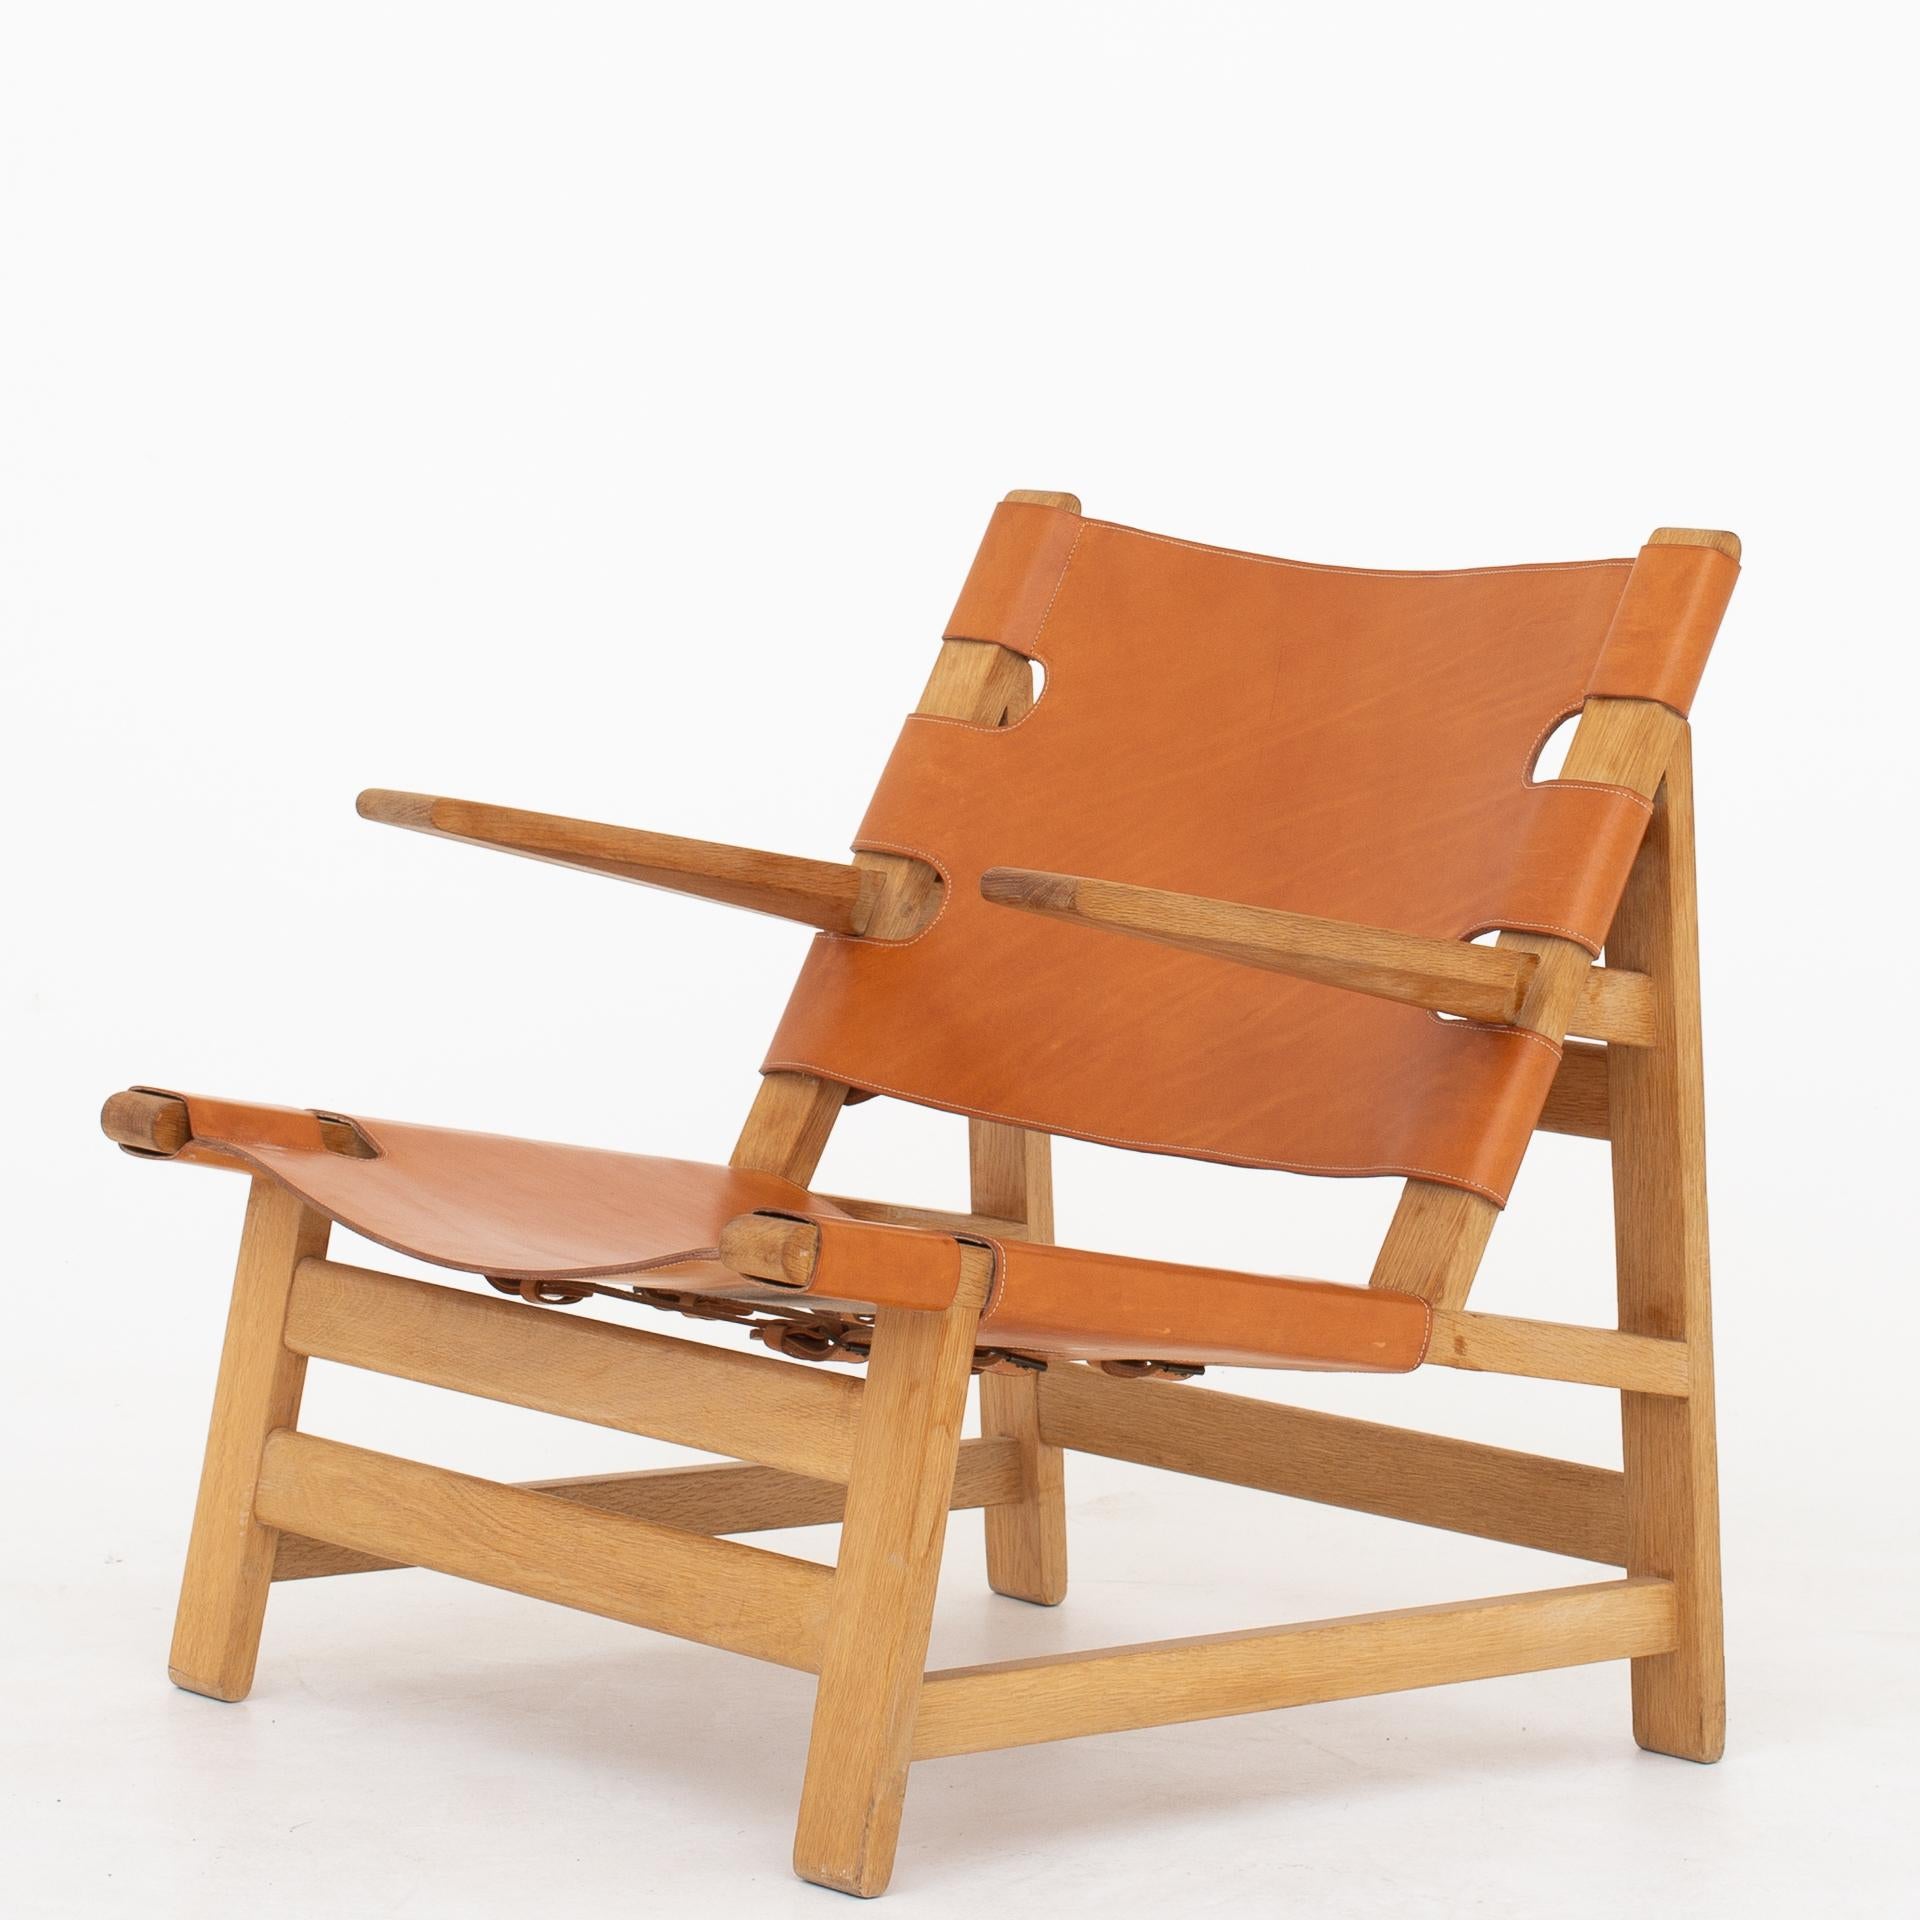 A pair of BM 2225 - easy chairs in oak and natural leather. Maker Fredericia Furniture.